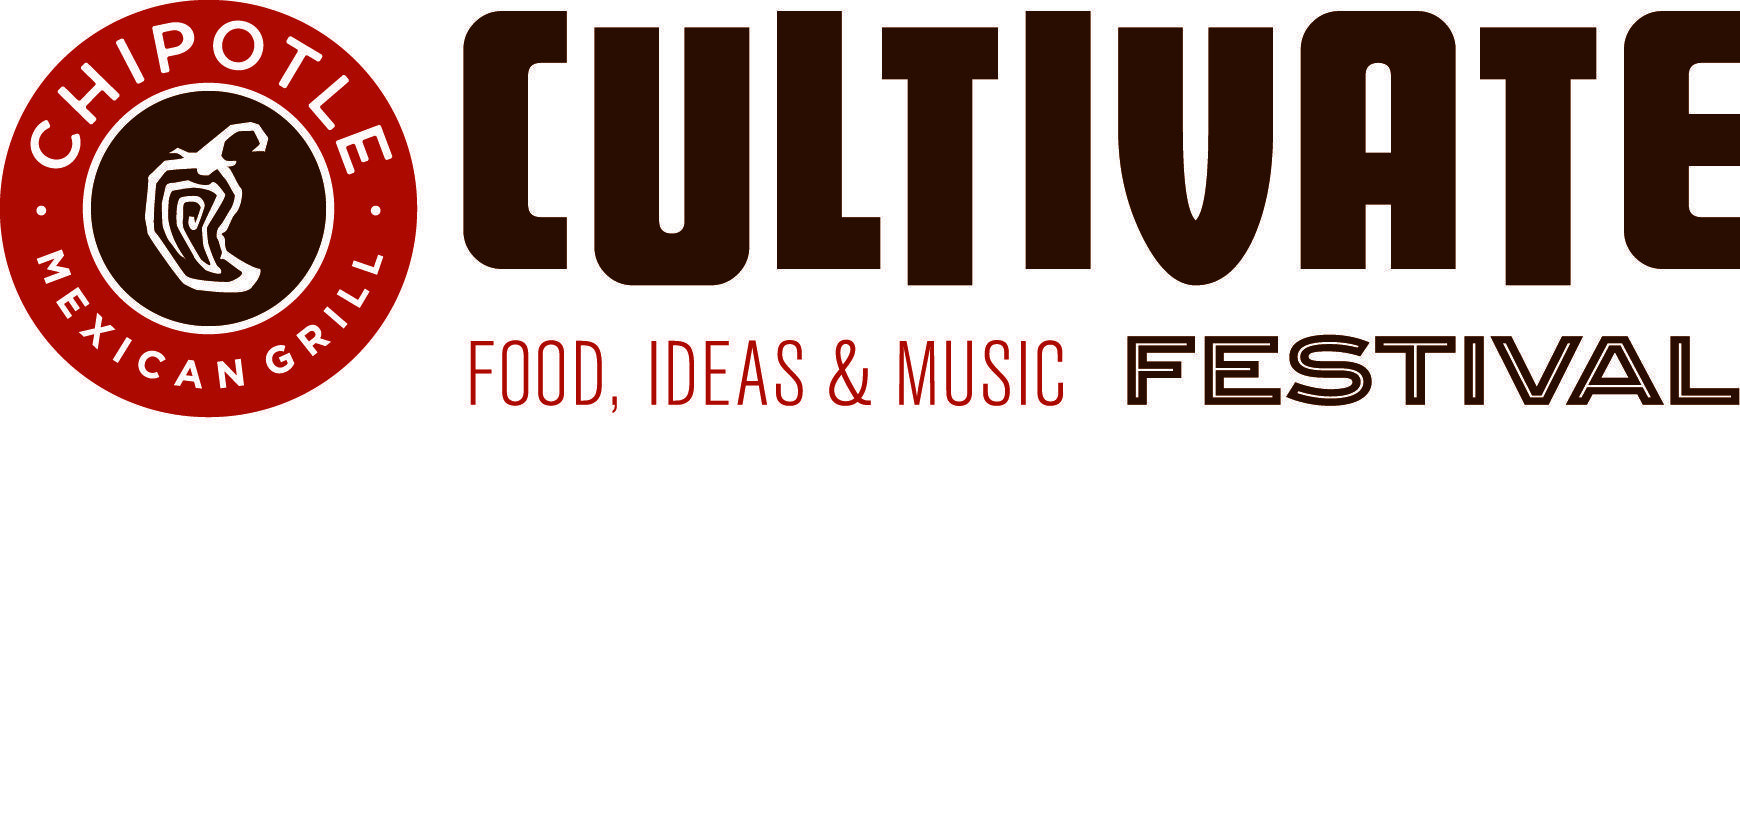 Funny Chipotle Logo - Chipotle Cultivate Free Family Festival in Kansas City ...